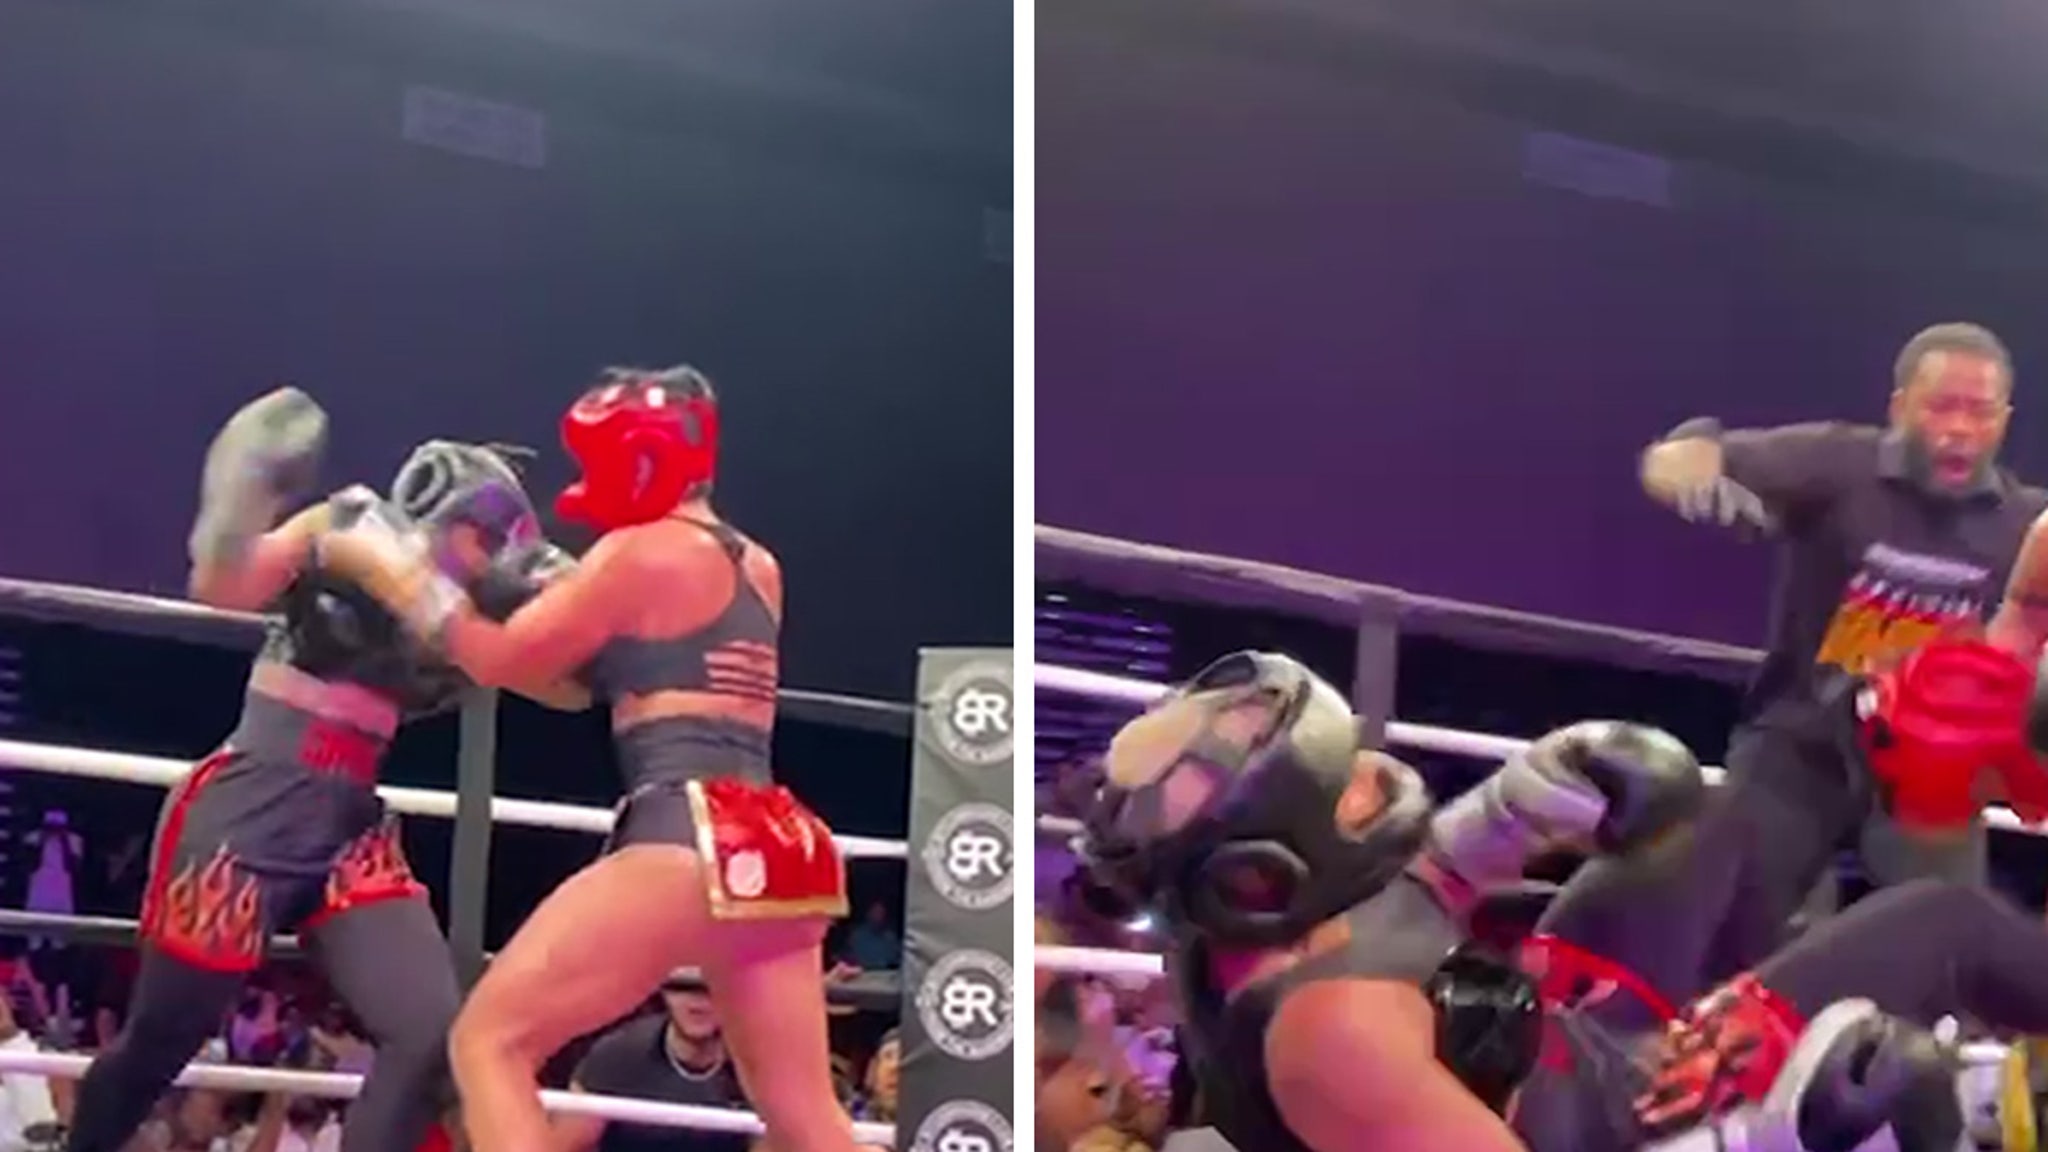 Blac Chyna Goes Down Really hard But Fights to Attract in Superstar Boxing Match